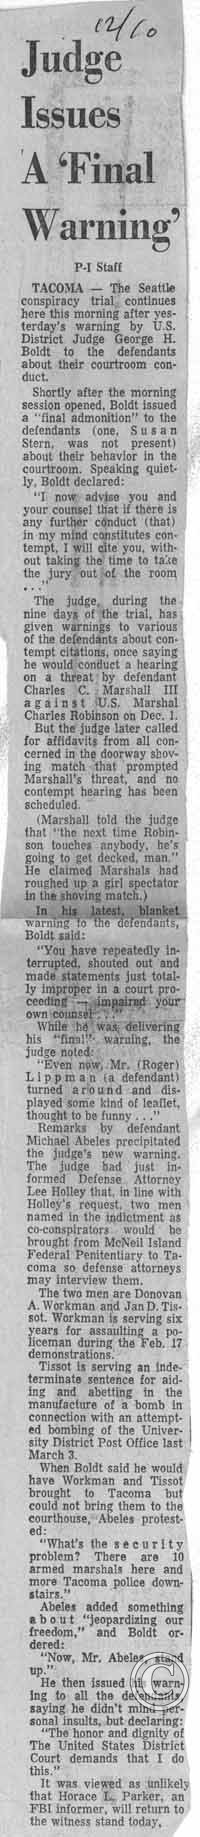 Judge Issues A Final Warning, 12/10/1970